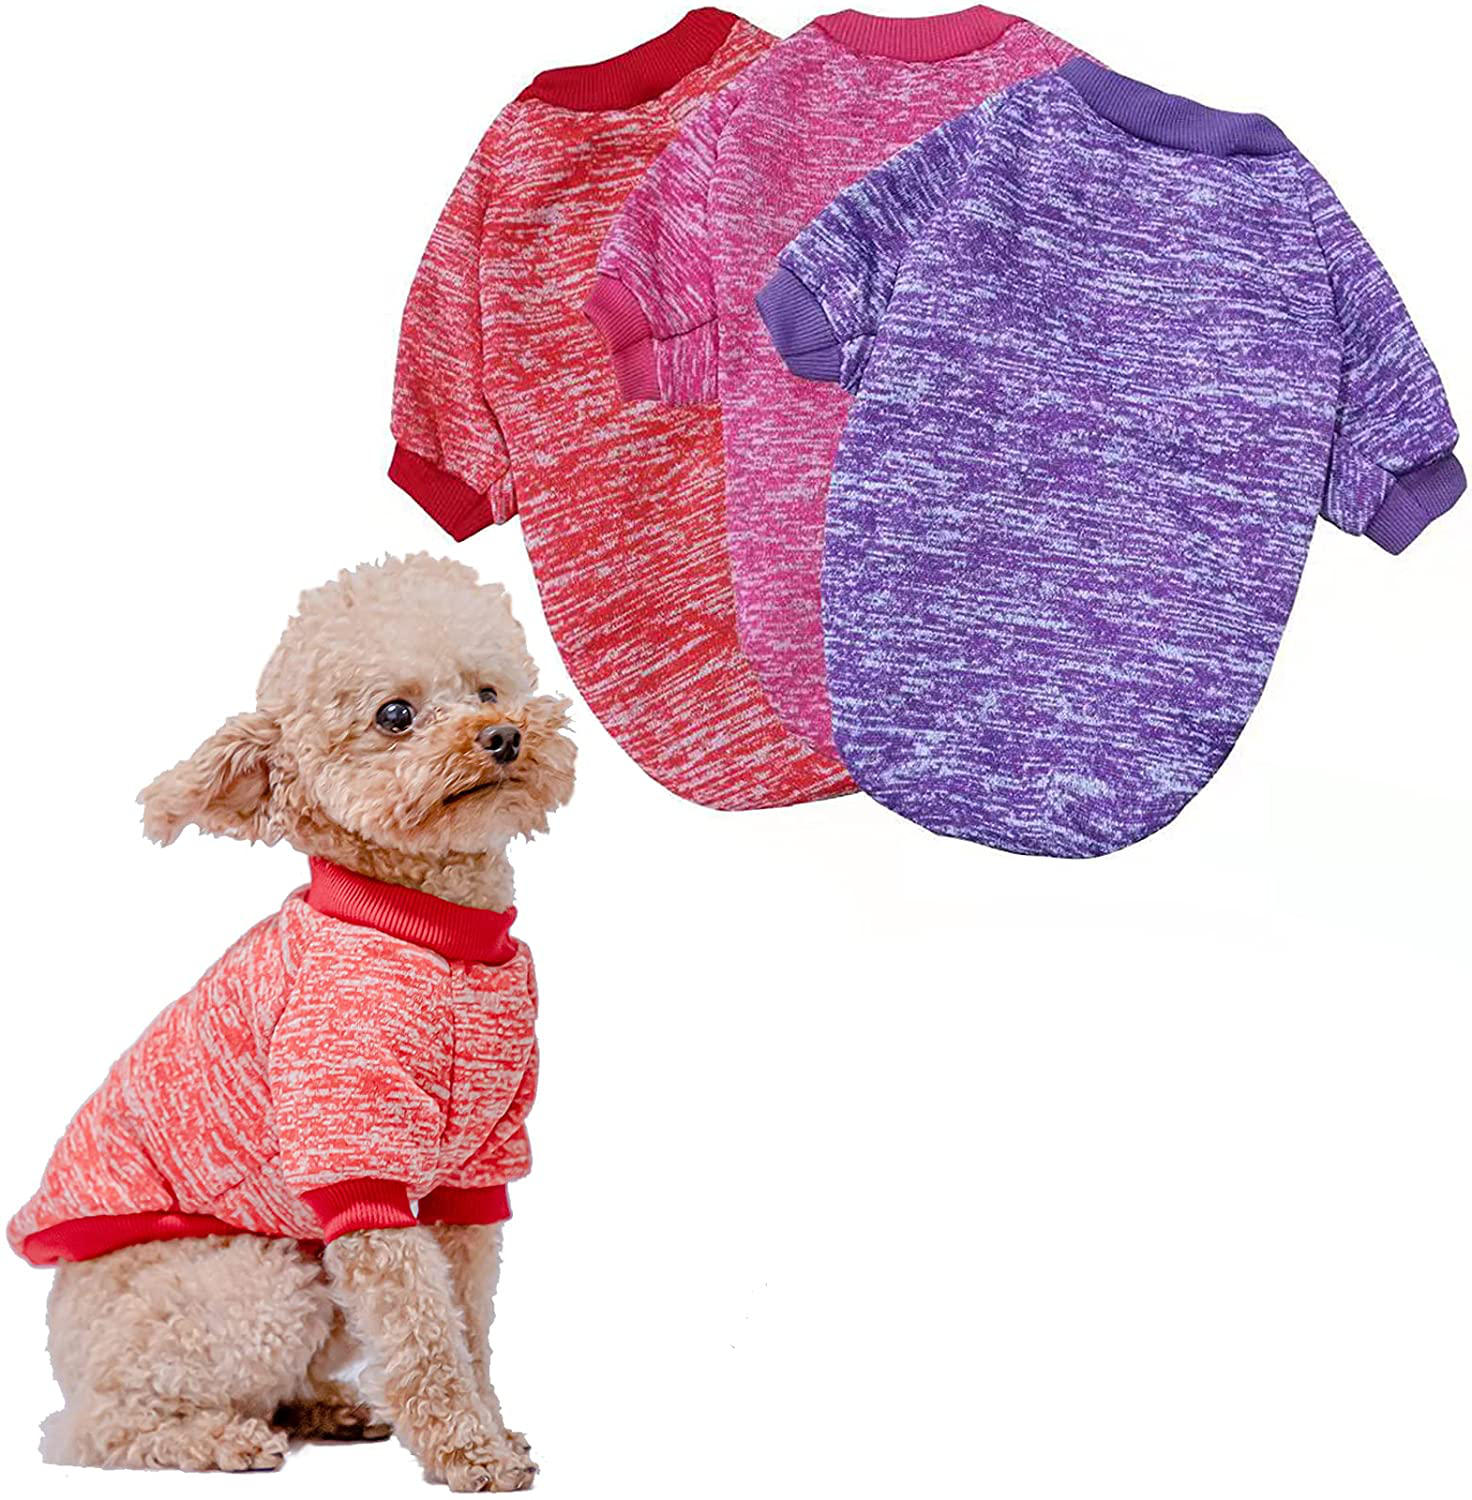 Pack of 3 Dog Hoodies Knitwear Dog Sweaters Stretchy Pet Clothes Soft Puppy Pullover Cat Hooded Shirts Casual Dog Sweatshirts for Small Dogs Cats Warm Dog Shirts Winter Puppy Sweater Animals & Pet Supplies > Pet Supplies > Dog Supplies > Dog Apparel K ERATISNIK Bright Colors Medium 